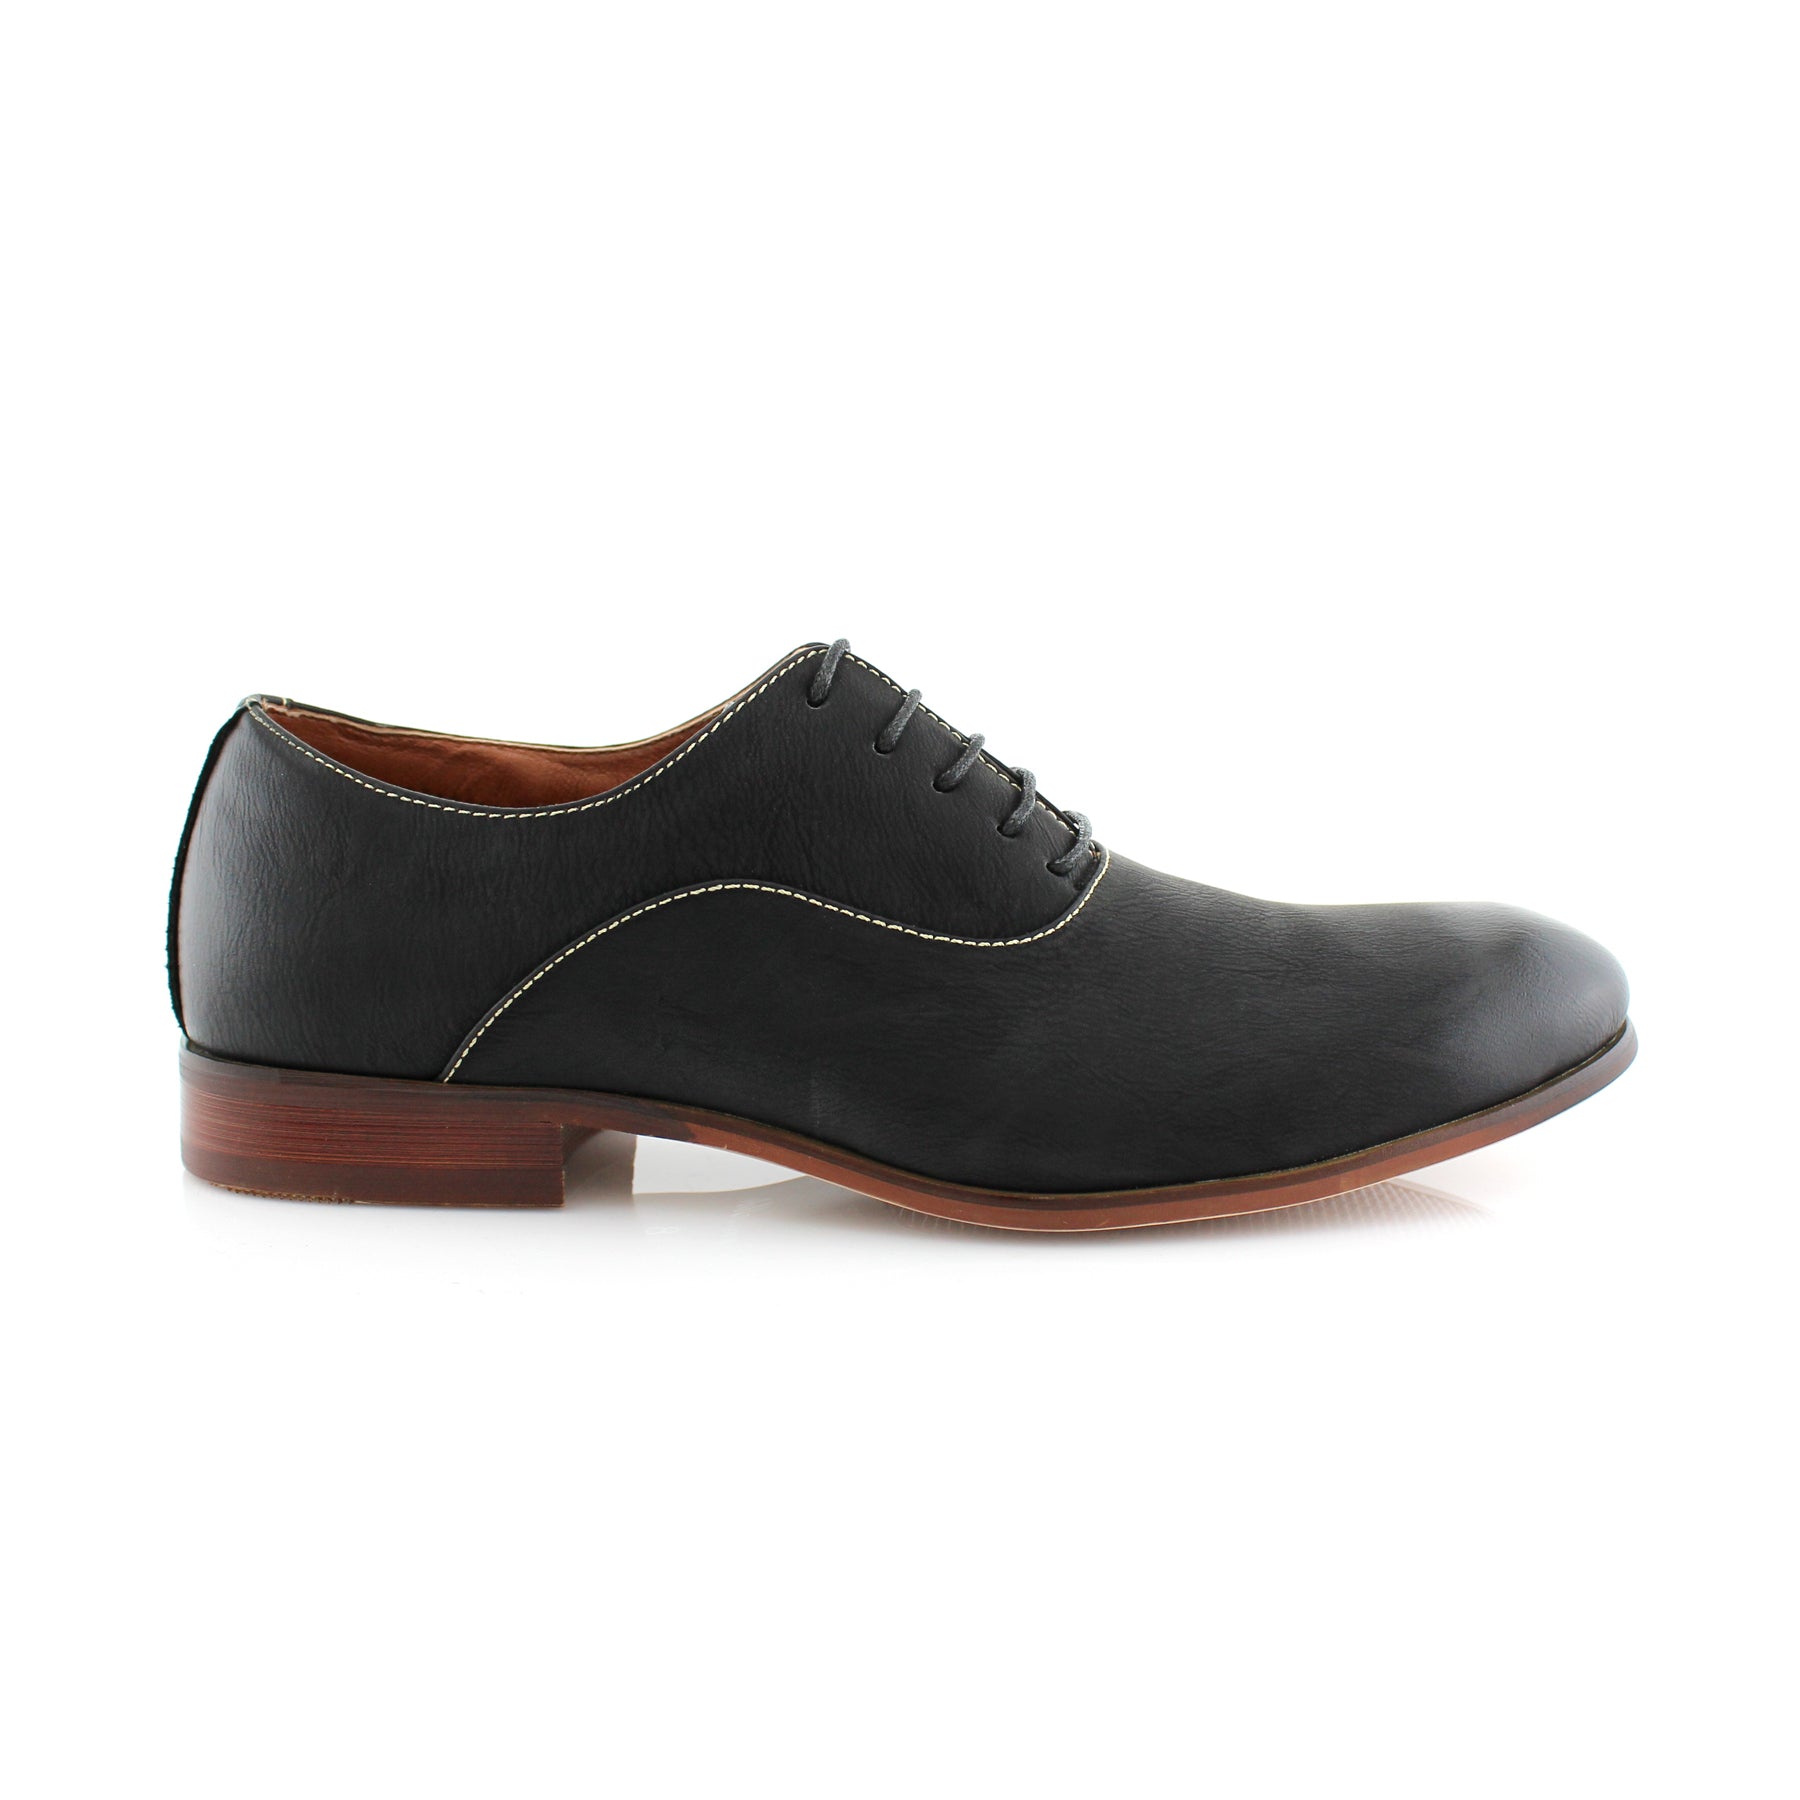 Minimalist Classic Oxfords | ABEL by Ferro Aldo | Conal Footwear | Outer Side Angle View